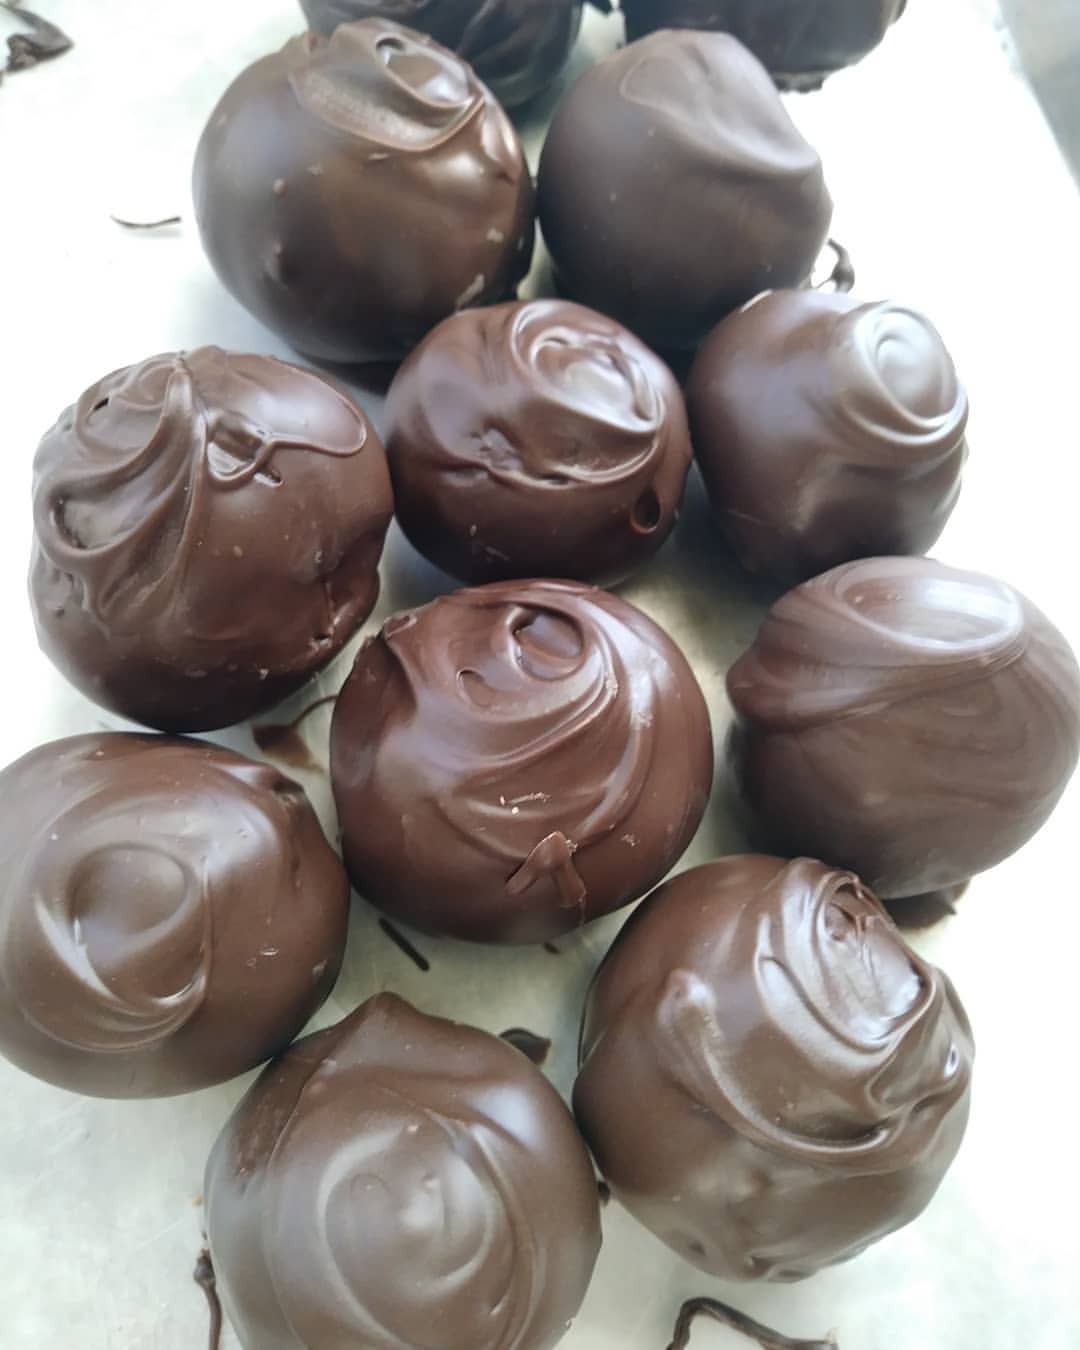 <p>Rum Truffle Balls<br/>
Made w/Wray & Nephew Over proof Rum <br/>
.<br/>
.<br/>
LAST DAY TO ORDER FOR CHRISTMAS!<br/>
.<br/>
.<br/>
Online Ordering Shipping & Delivery Available<br/>
.<br/>
.<br/>
.<br/>
.<br/>
.<br/>
.<br/>
.<br/>
.<br/>
#chocolatetruffle #trufflelover #truffleseason #truffles #candy #adultcandy #ordernow #foradultsonly #chocolategoodness #chocolate #realcakebaker #foodlikewhat #chocolatecandy #rumcandy #onlinebakery #onlineshopping #wrayandnephewrum #thedailybite #eatthis #giftforhim #giftforher #chocolatier #chocolatiers #handmadecandy #handcraft #handcrafted #trufflelove #trufflechocolate (at Beverly Hills, California)<br/>
<a href="https://www.instagram.com/p/B6TAxz2g8Z3/?igshid=2v005ktsoy9l" target="_blank">https://www.instagram.com/p/B6TAxz2g8Z3/?igshid=2v005ktsoy9l</a></p>